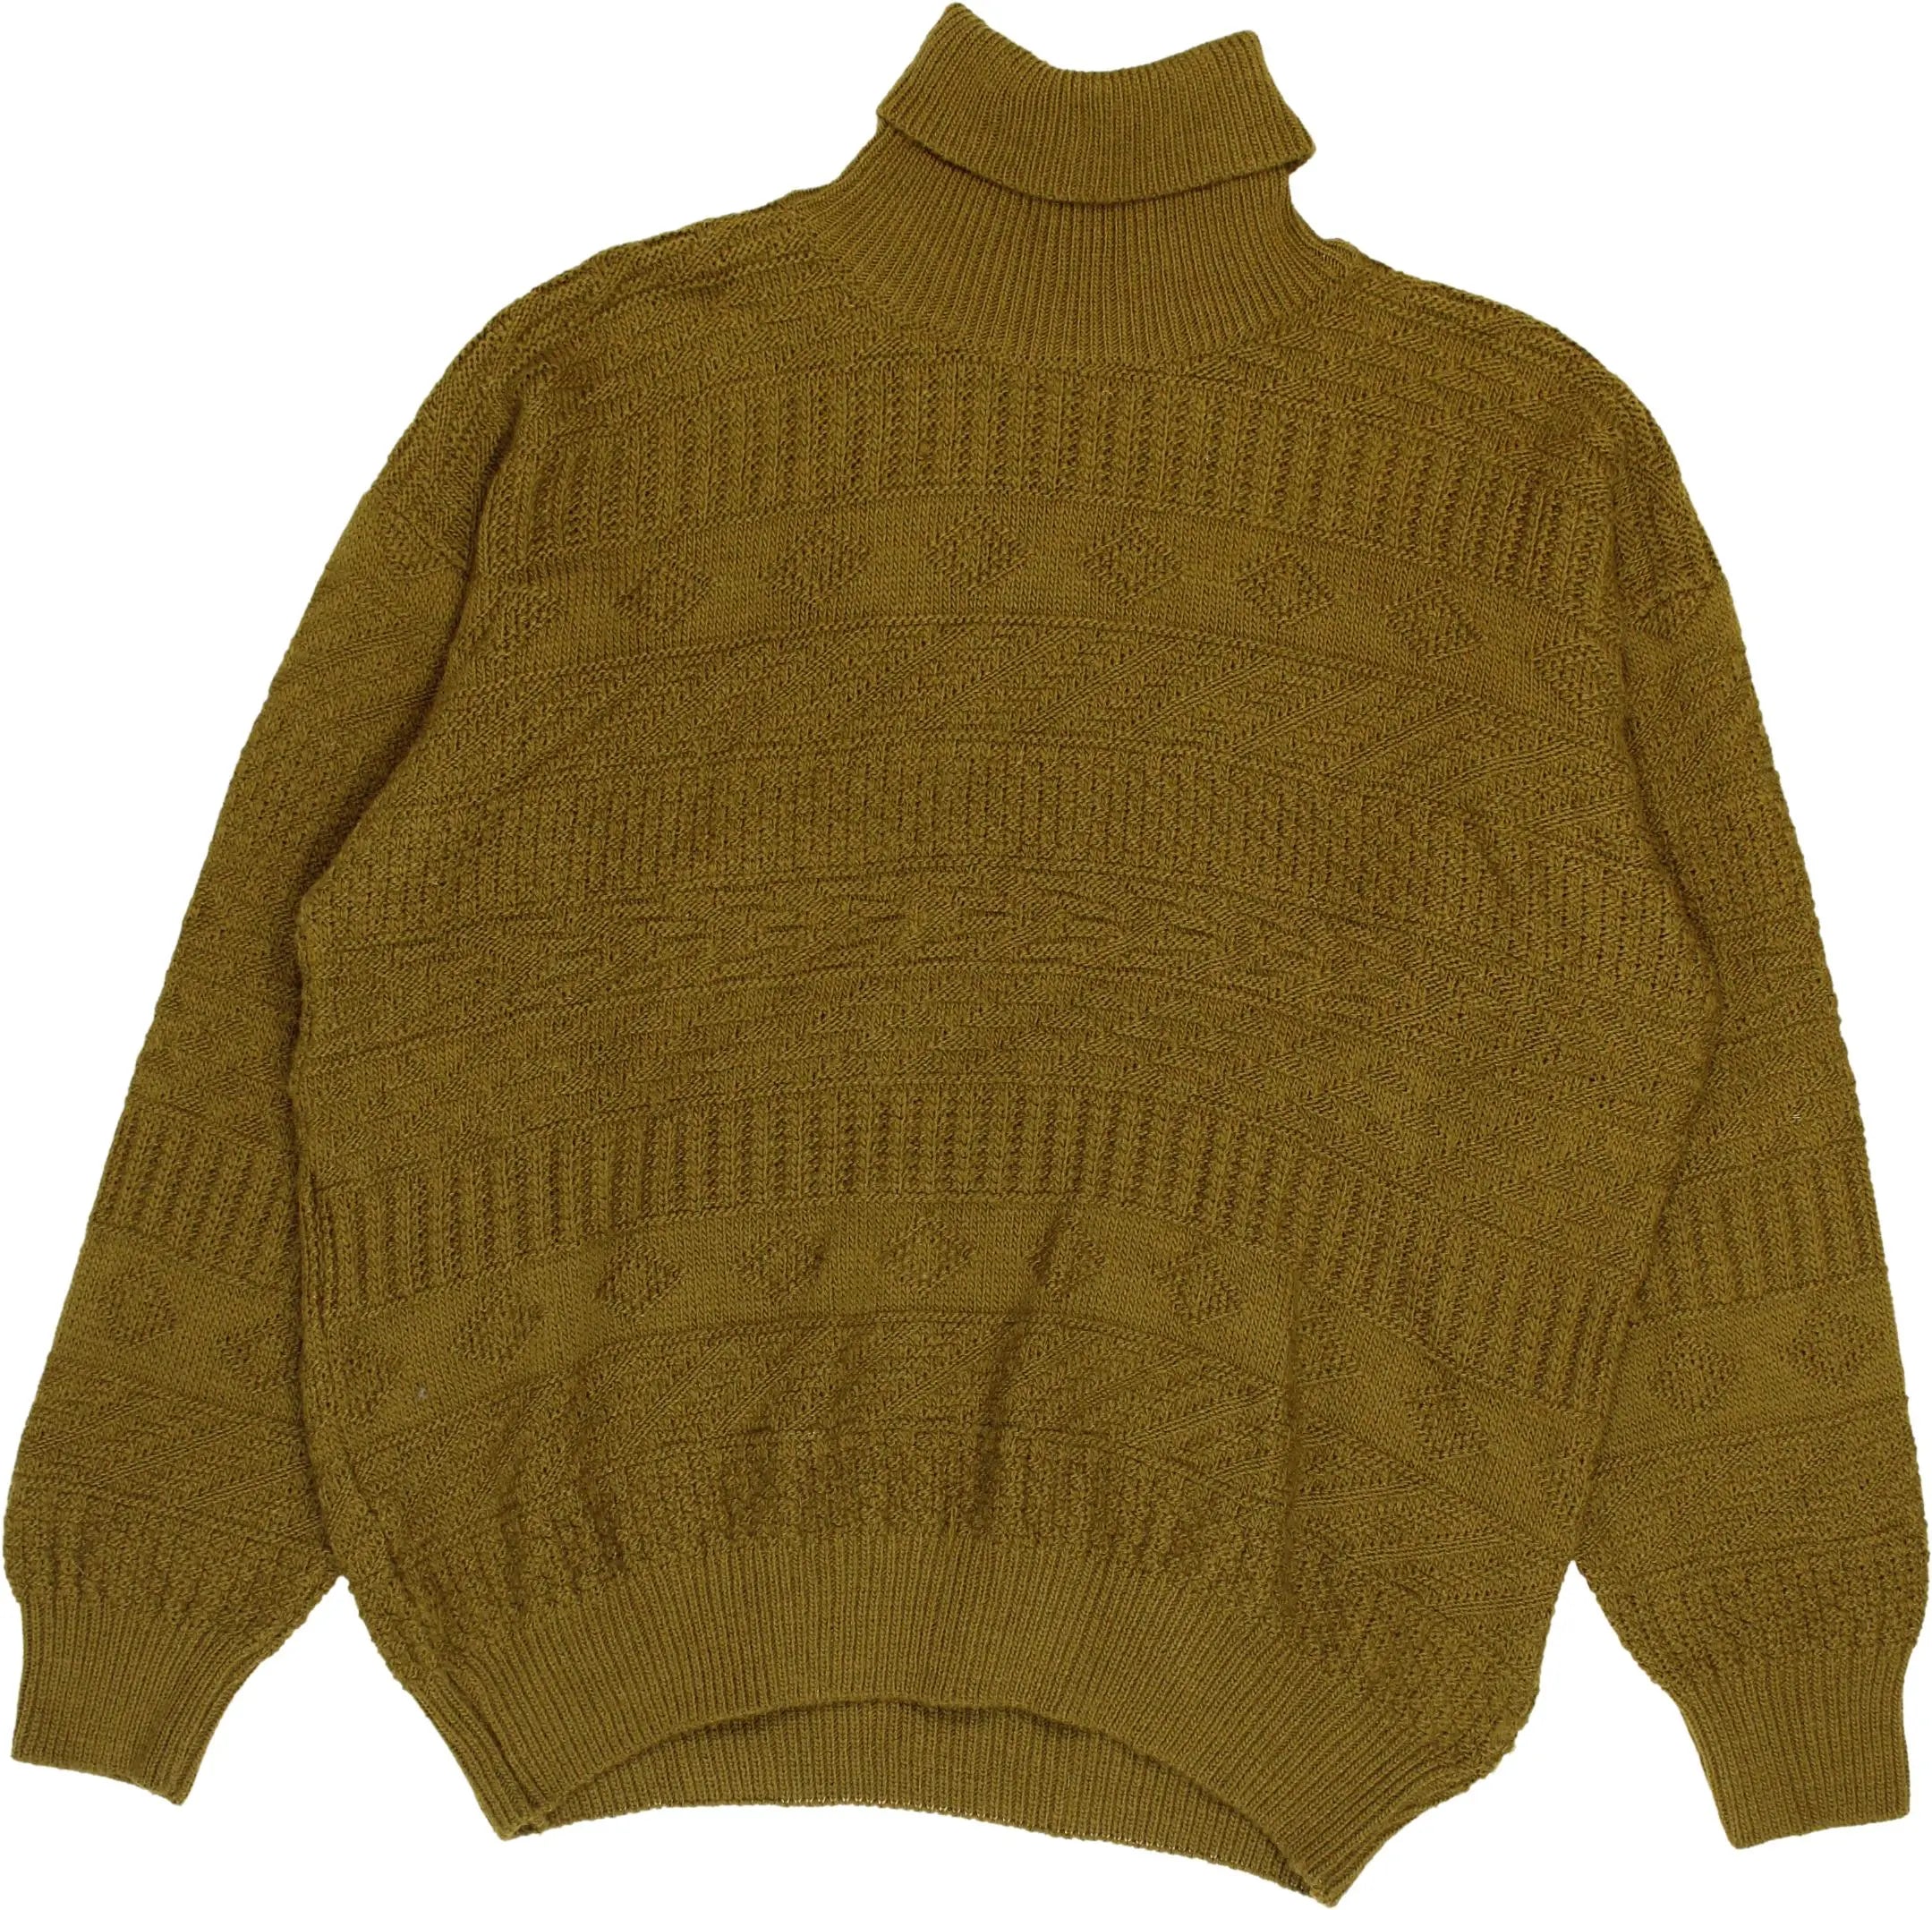 Unknown - 90s Knitted Turtleneck Jumper- ThriftTale.com - Vintage and second handclothing